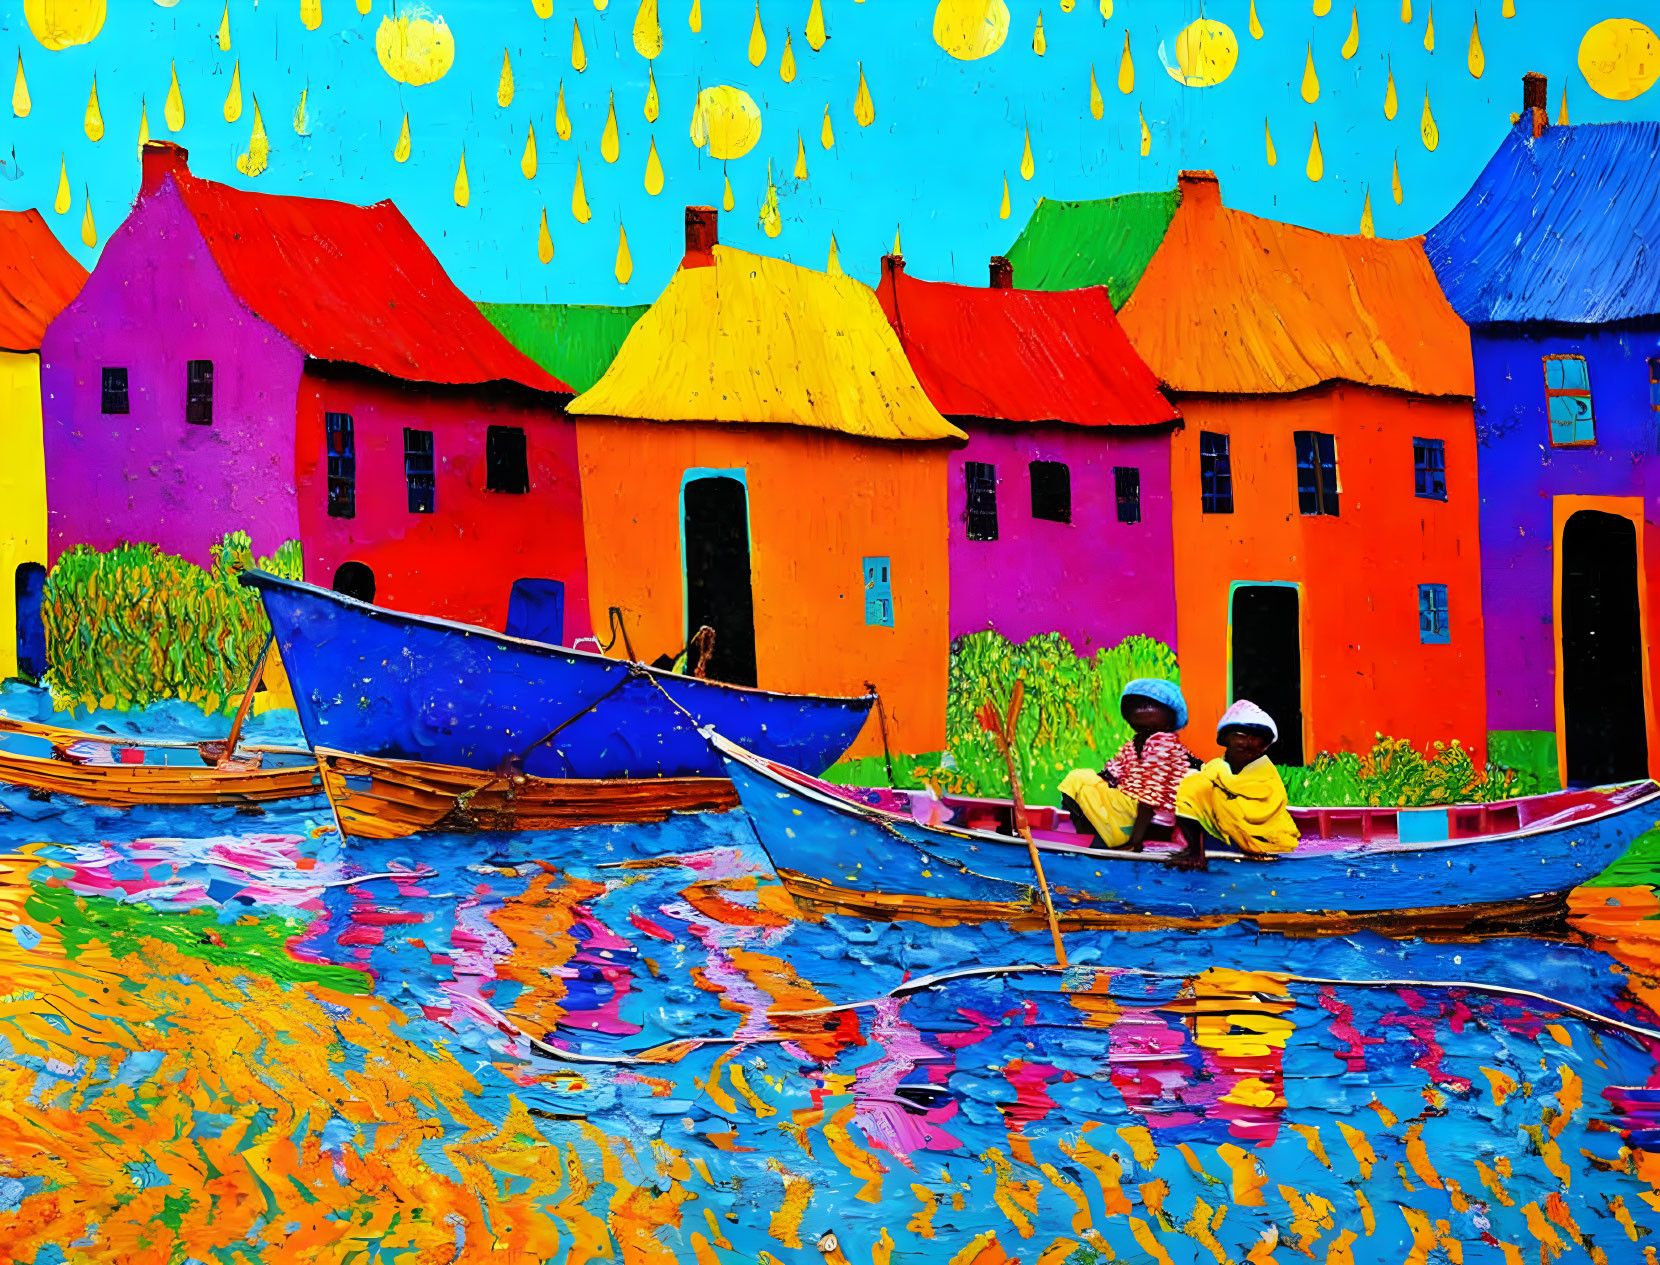 Colorful painting: two people in blue boat on vibrant river with colorful houses under blue sky.